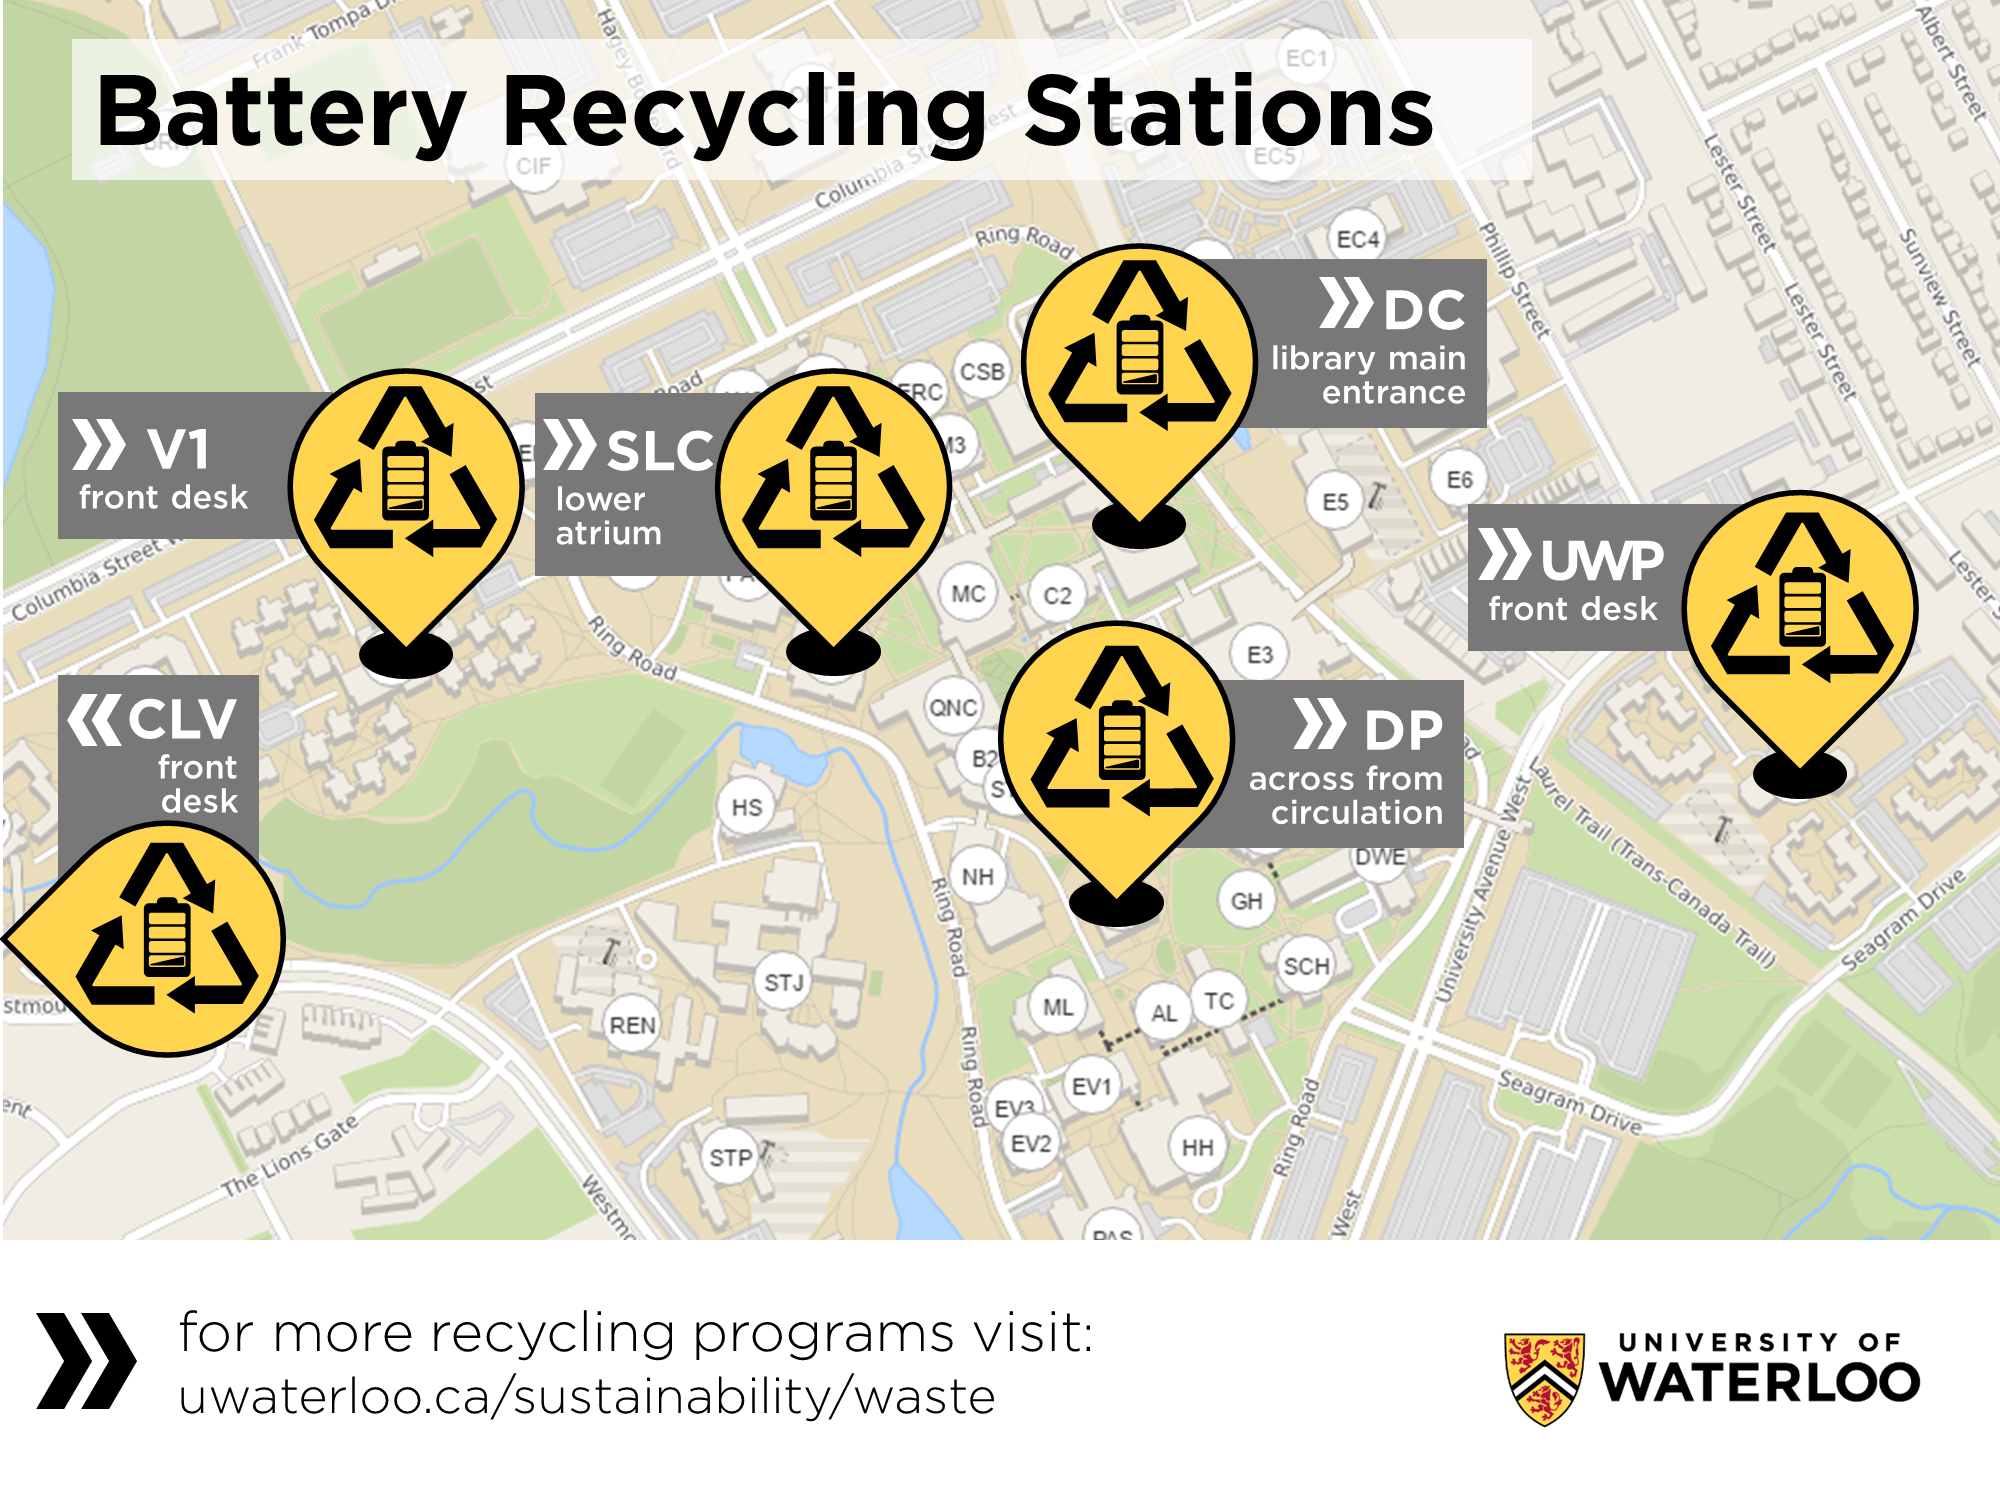 Battery Recycling Locations: CLV Front Desk, UWP Front Desk, V1 Front Desk, SLC lower atrium, DP across from circulation, DC library entrance